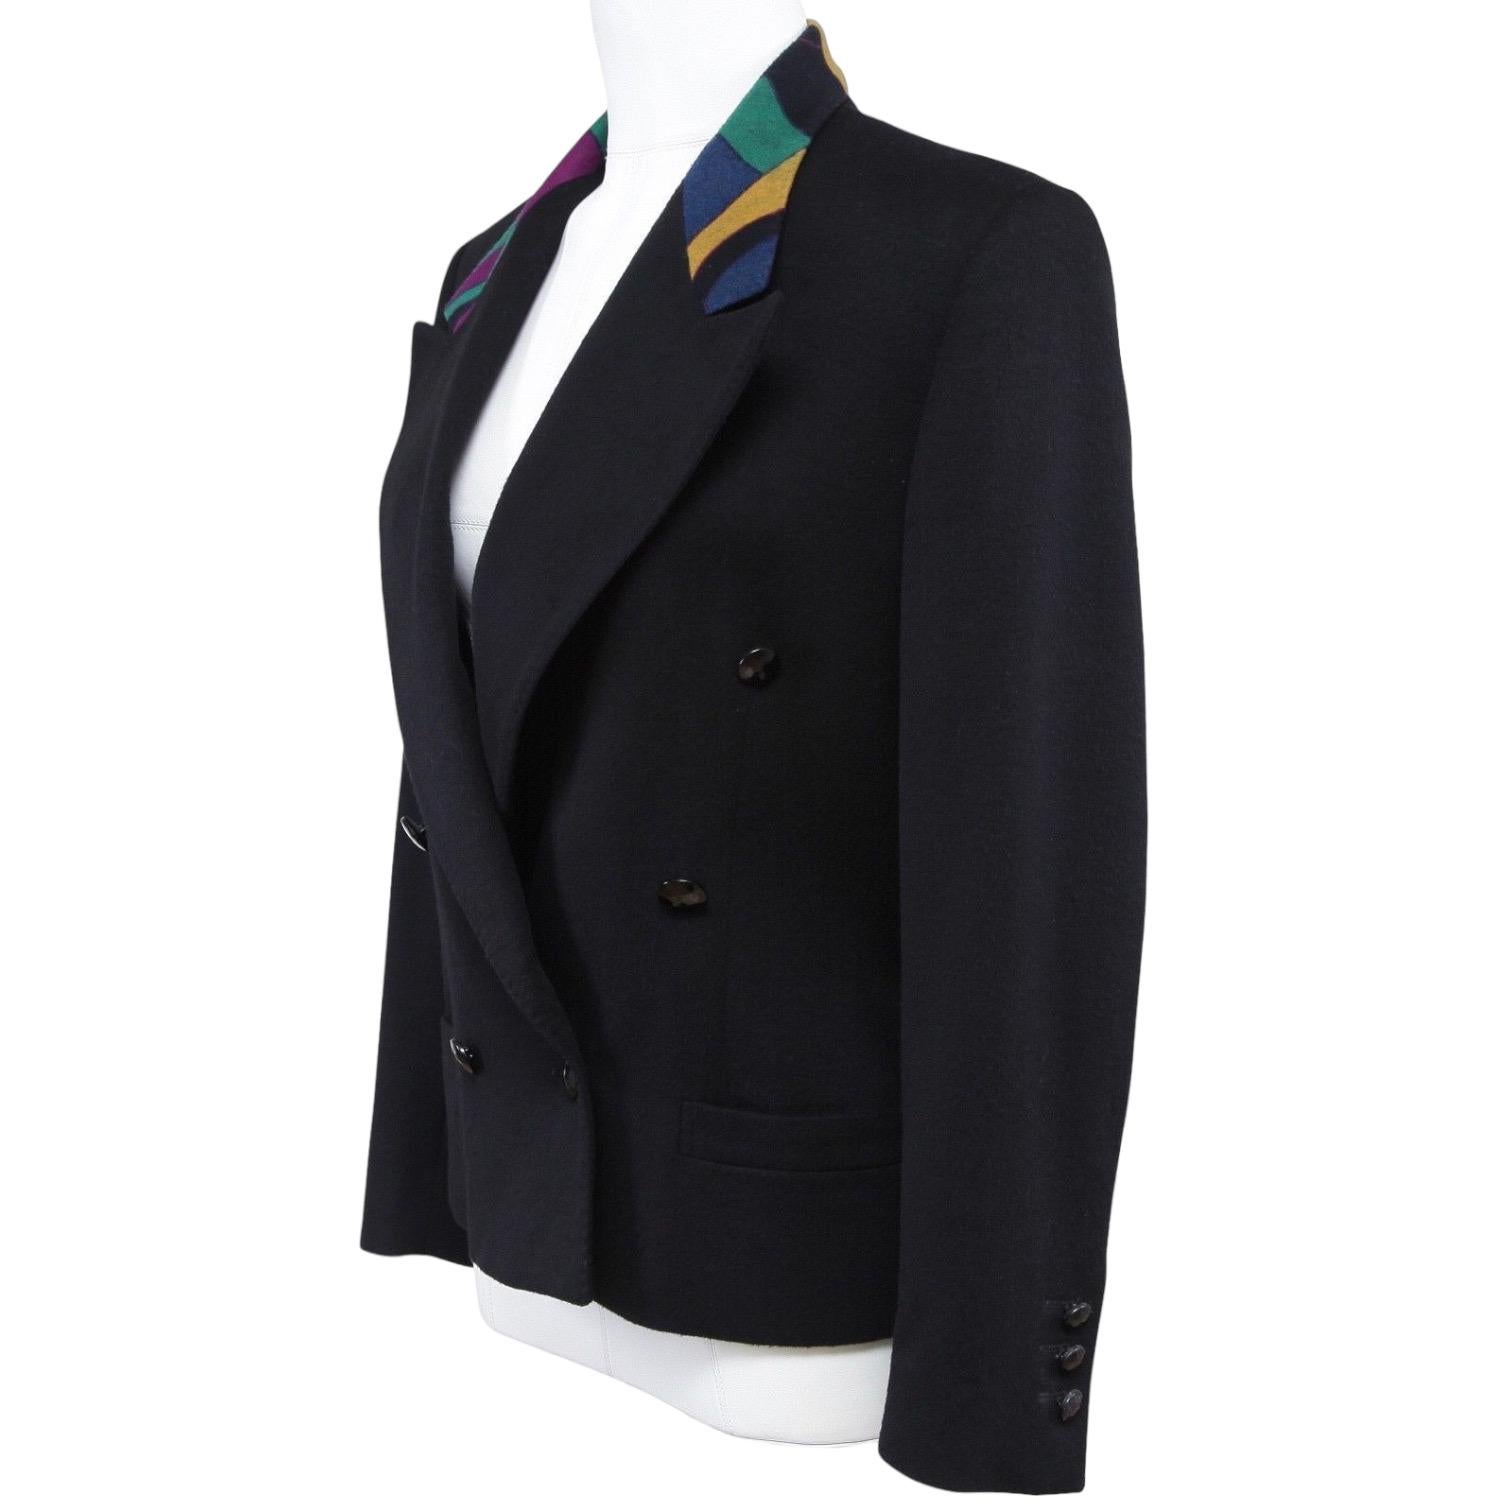 GIANNI VERSACE Jacket Blazer Double Breasted Wool Black Long Sleeve 4 38 VINTAGE In Fair Condition For Sale In Hollywood, FL